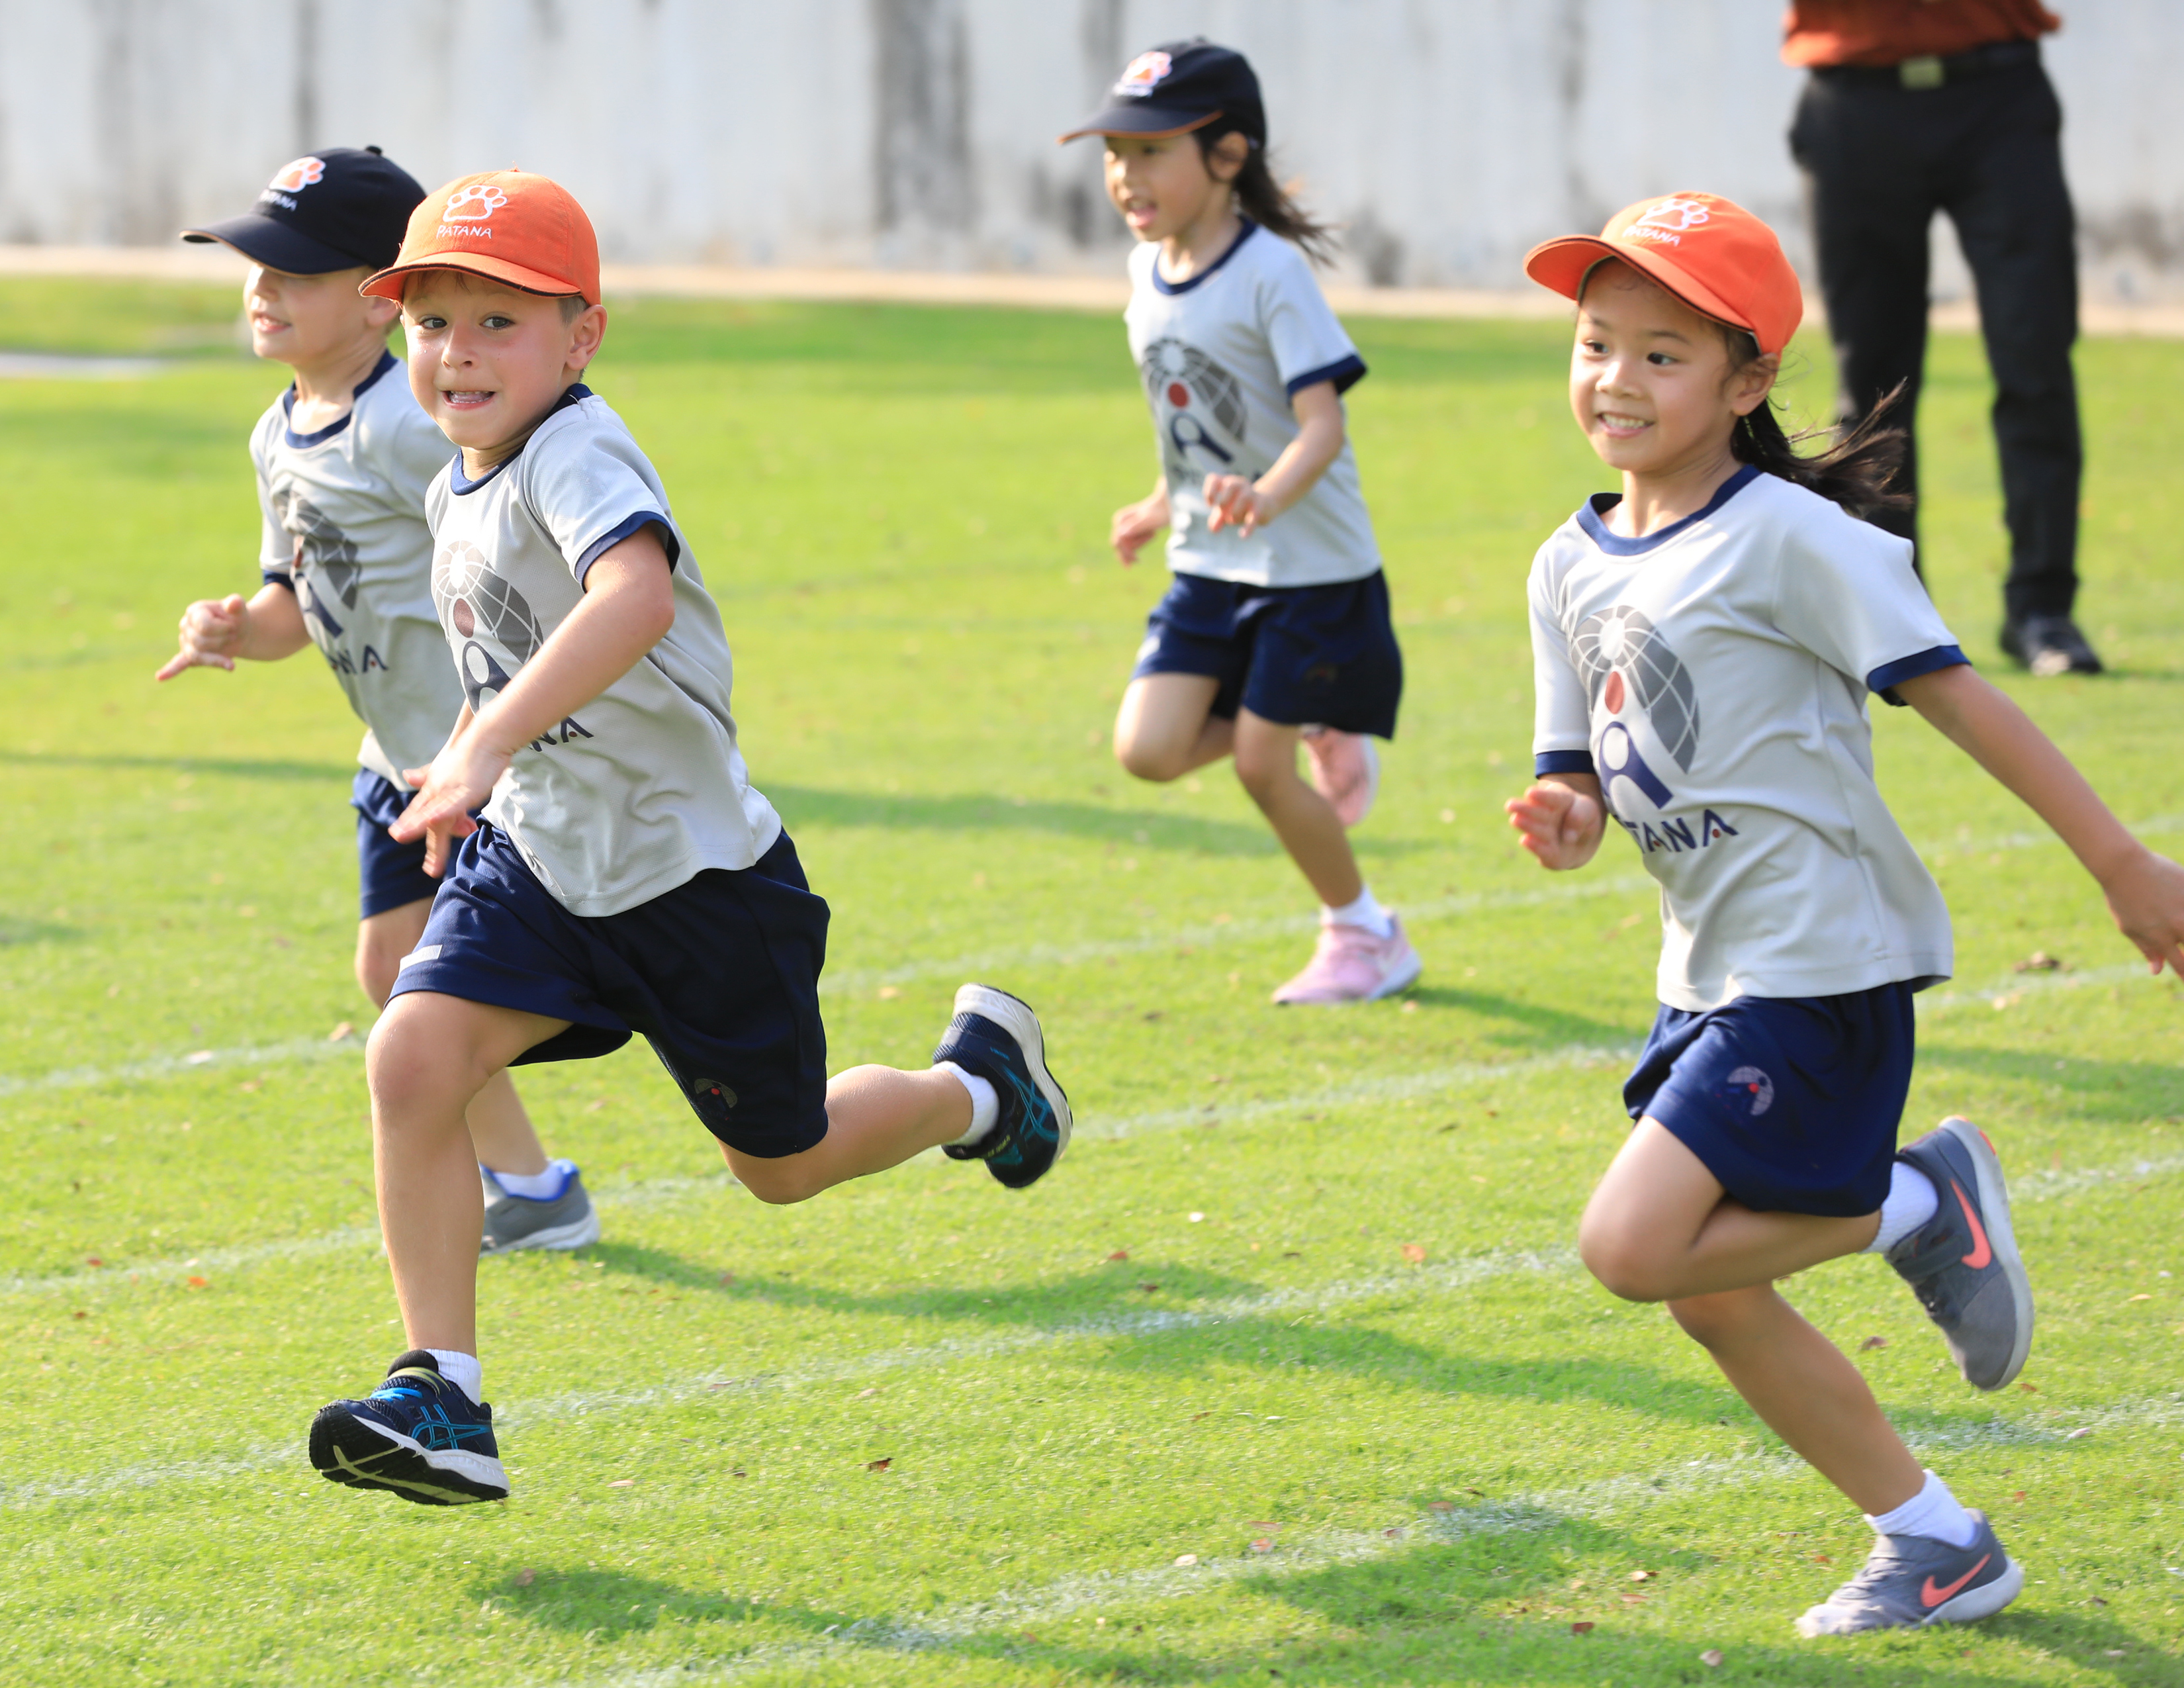 Sports Day Releases the Tigers!